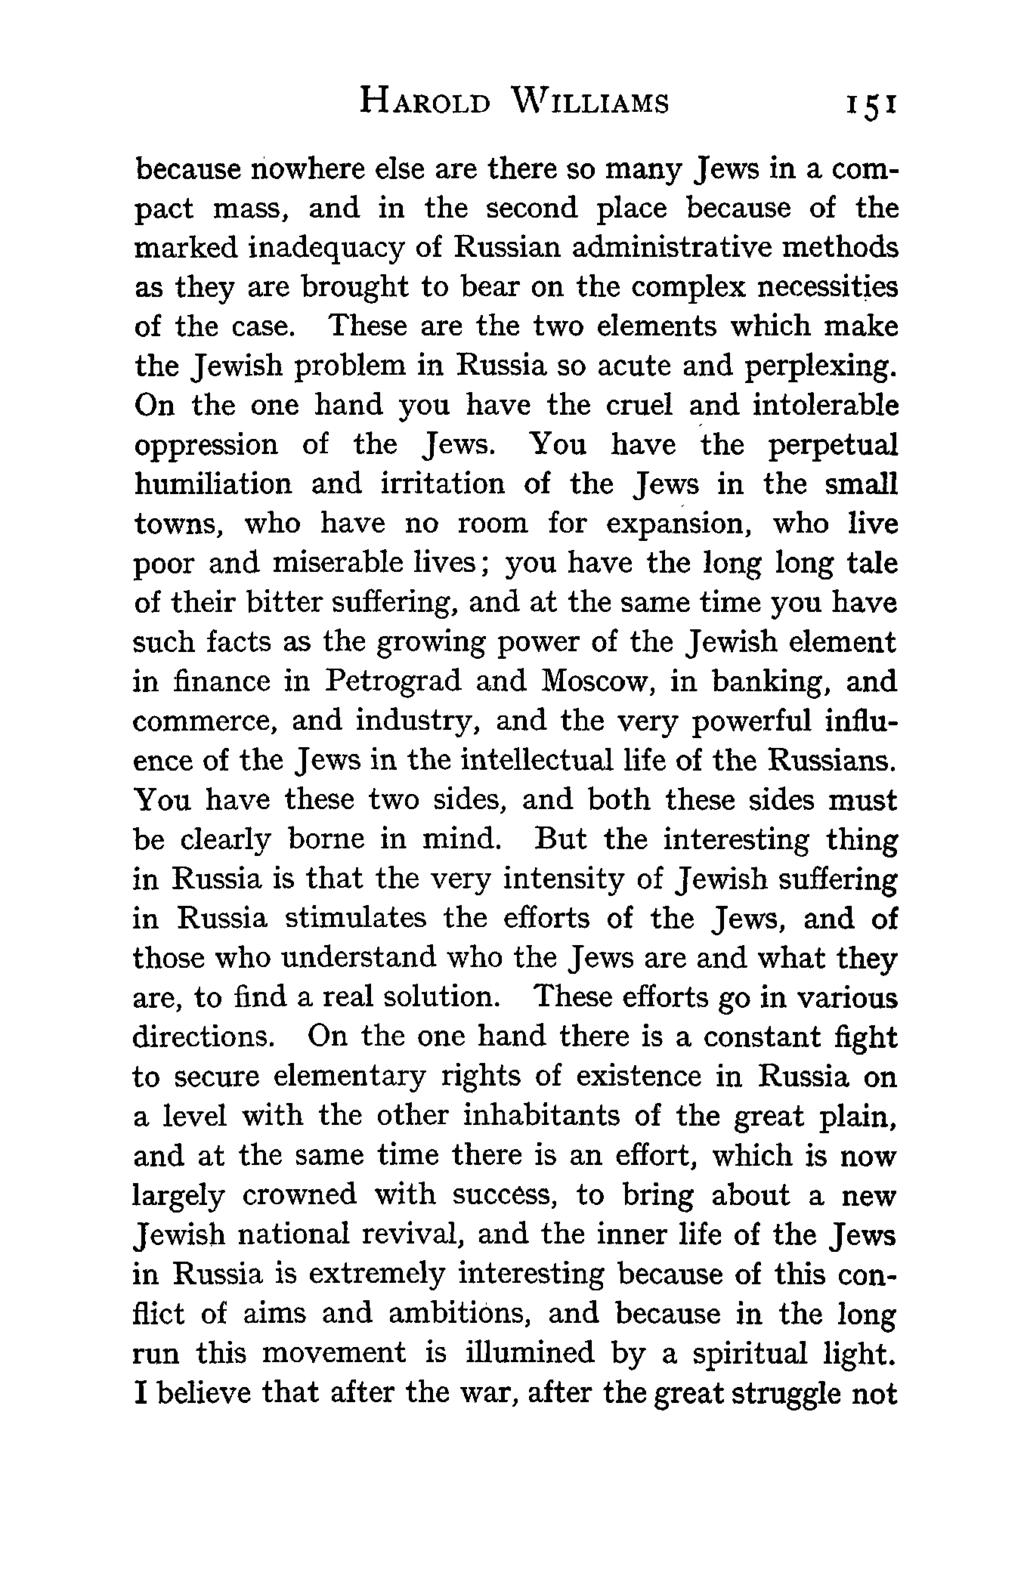 HAROLD WILLIAMS 151 because nowhere else are there so many Jews in a compact mass, and in the second place because of the marked inadequacy of Russian administrative methods as they are brought to